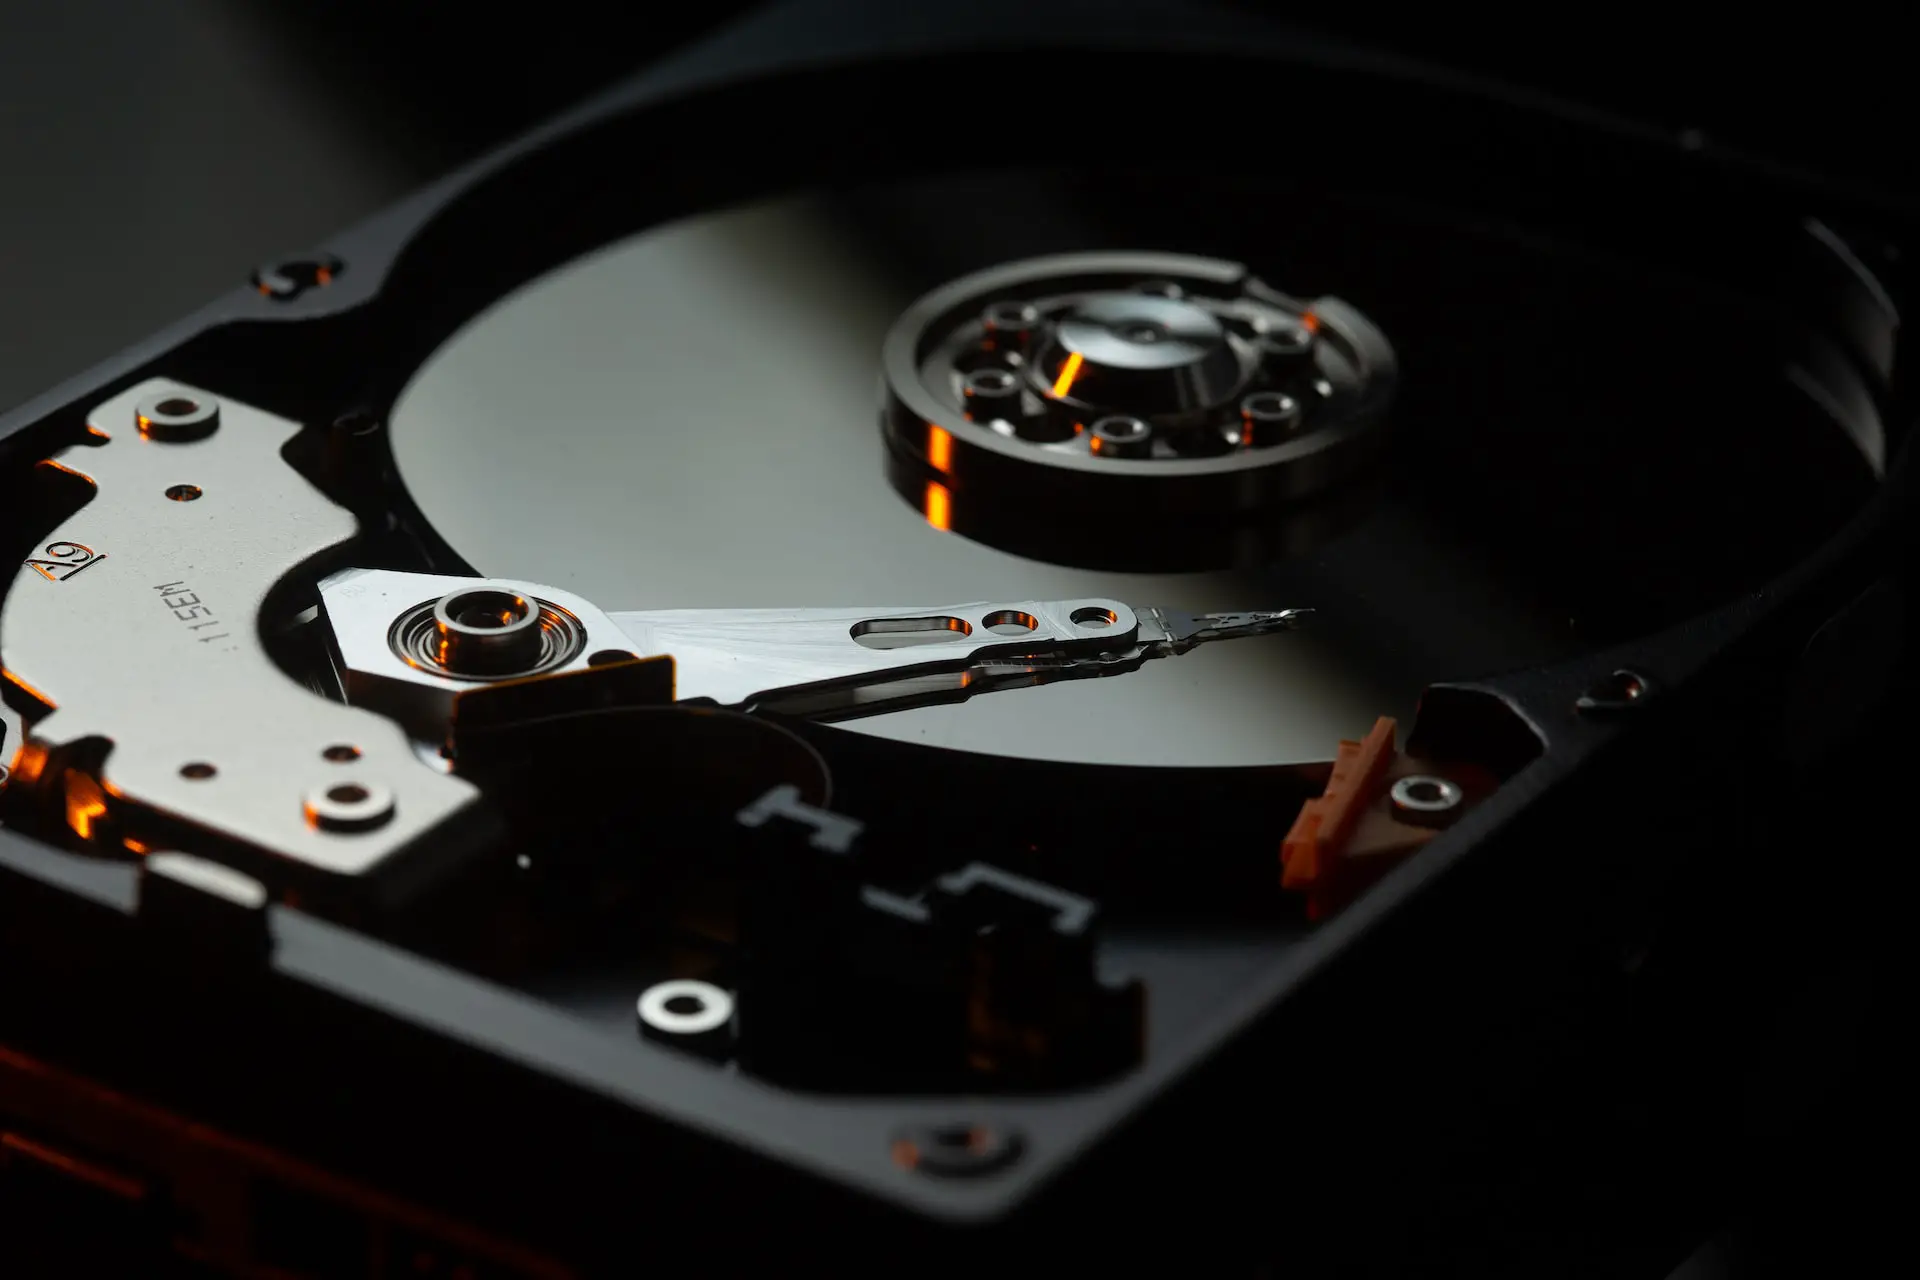 How to Prevent Losing Data When Formatting a Drive